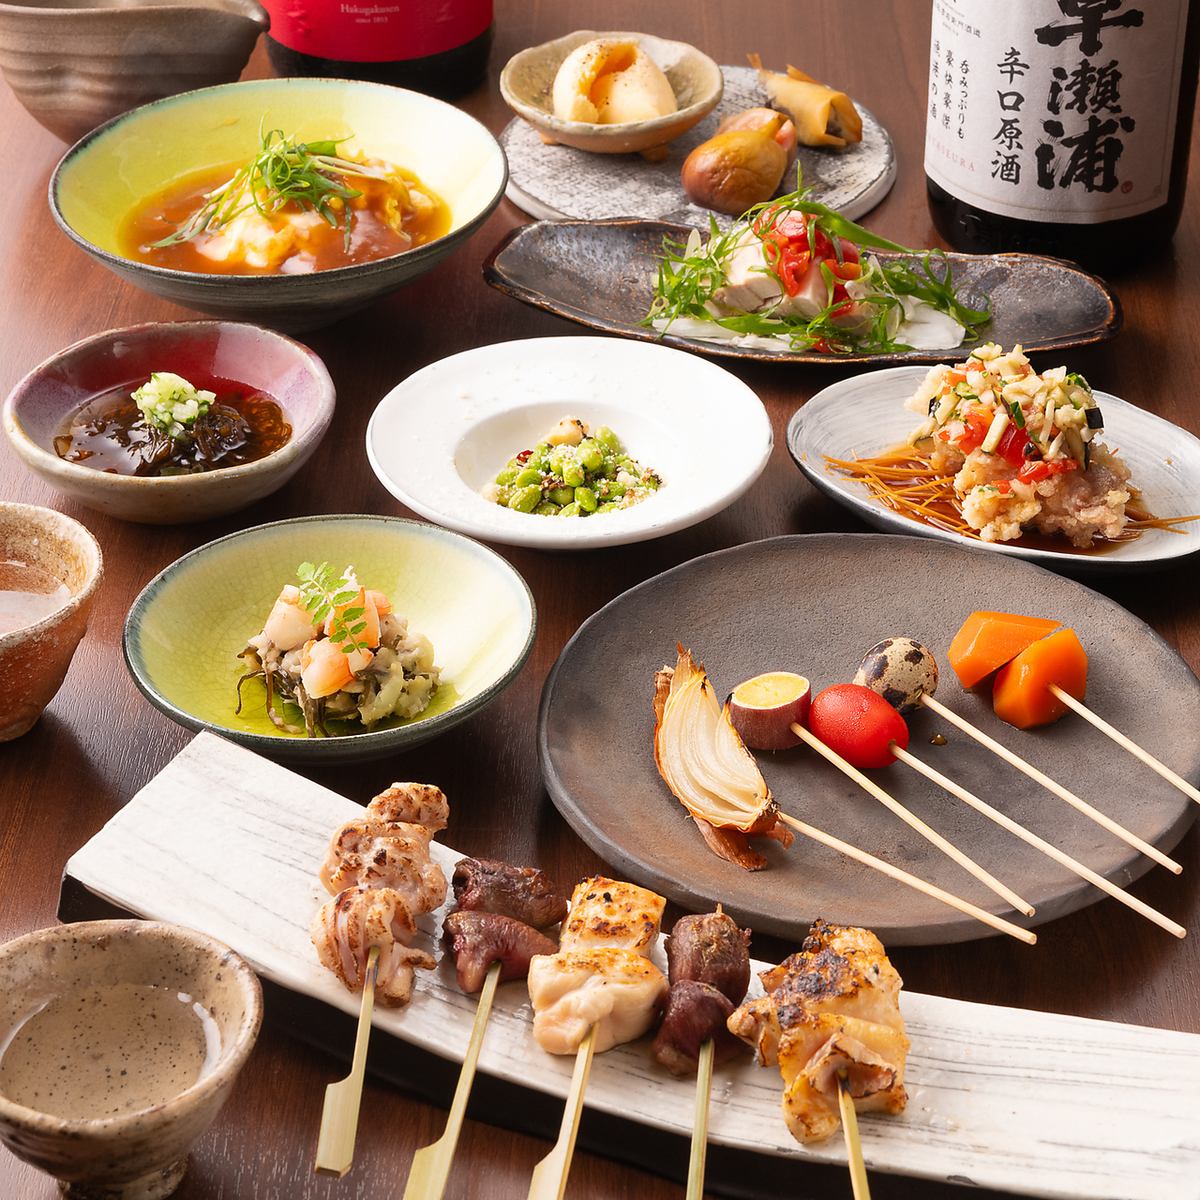 An izakaya where you can enjoy Reiwa obanzai to your heart's content, carefully bringing out the flavor of seasonal ingredients.